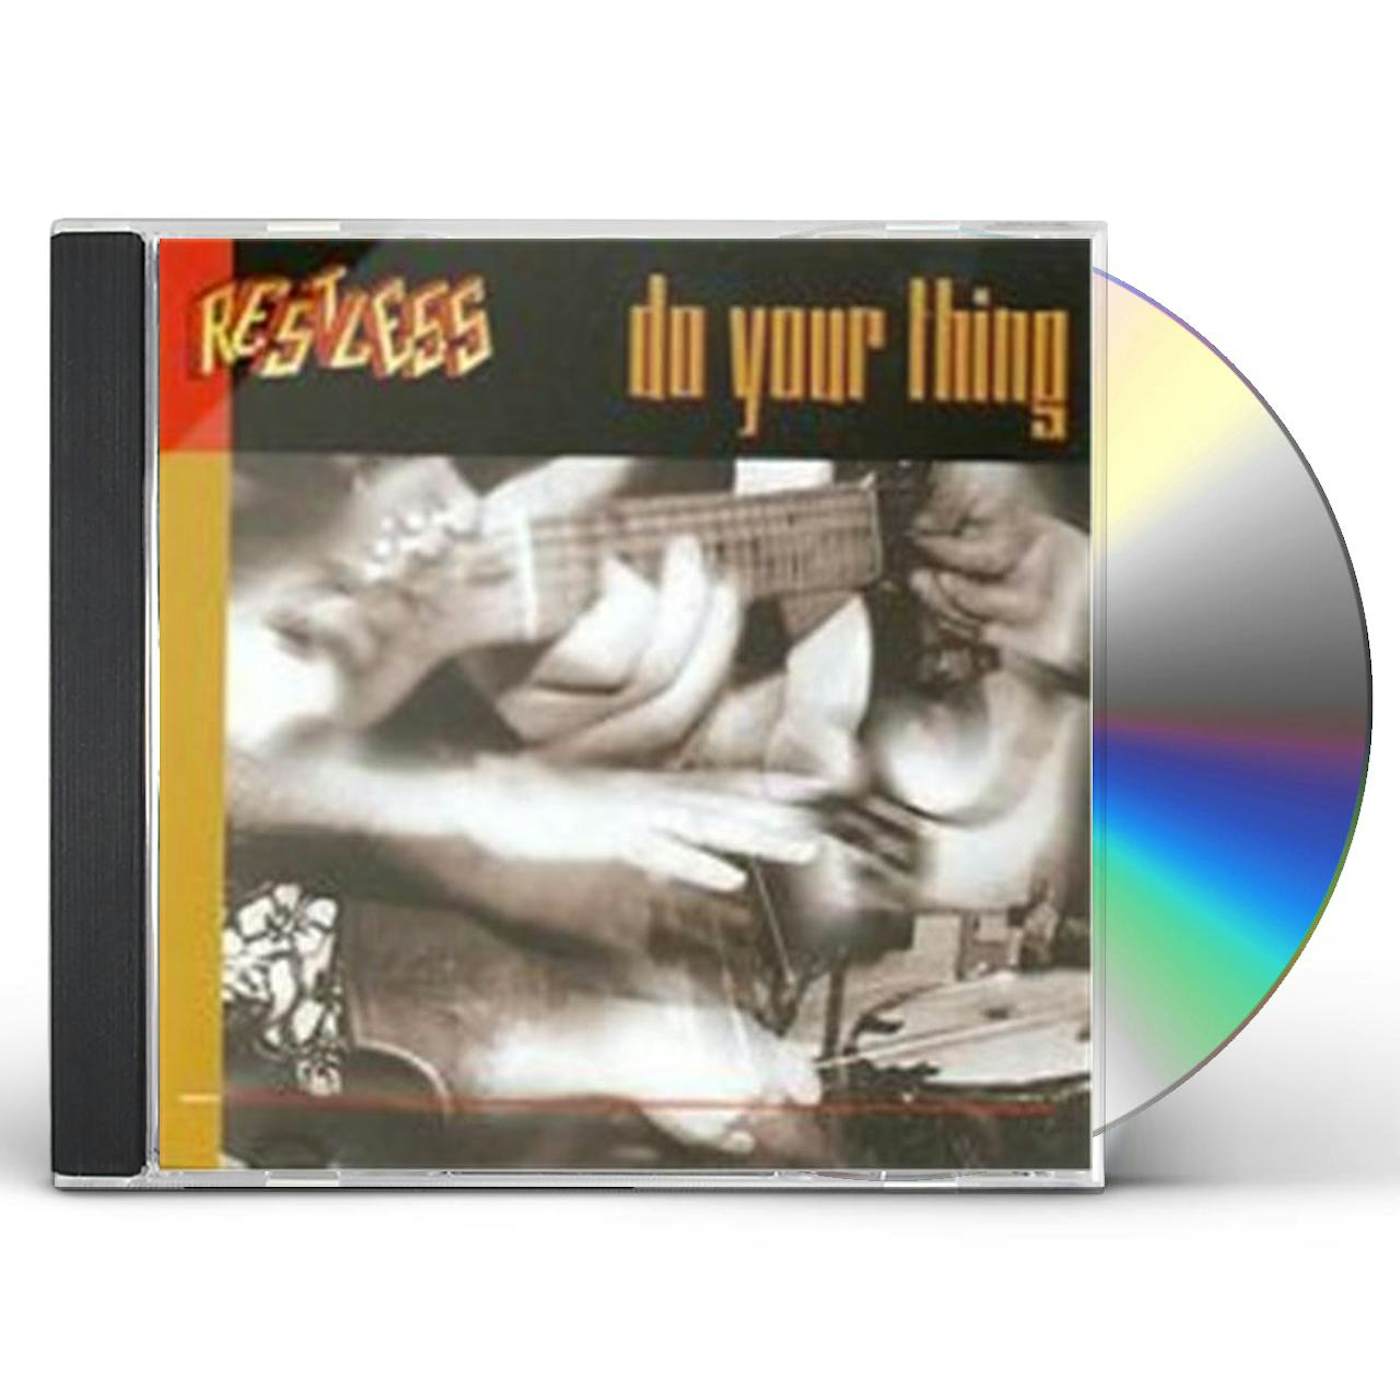 Restless DO YOUR THING CD